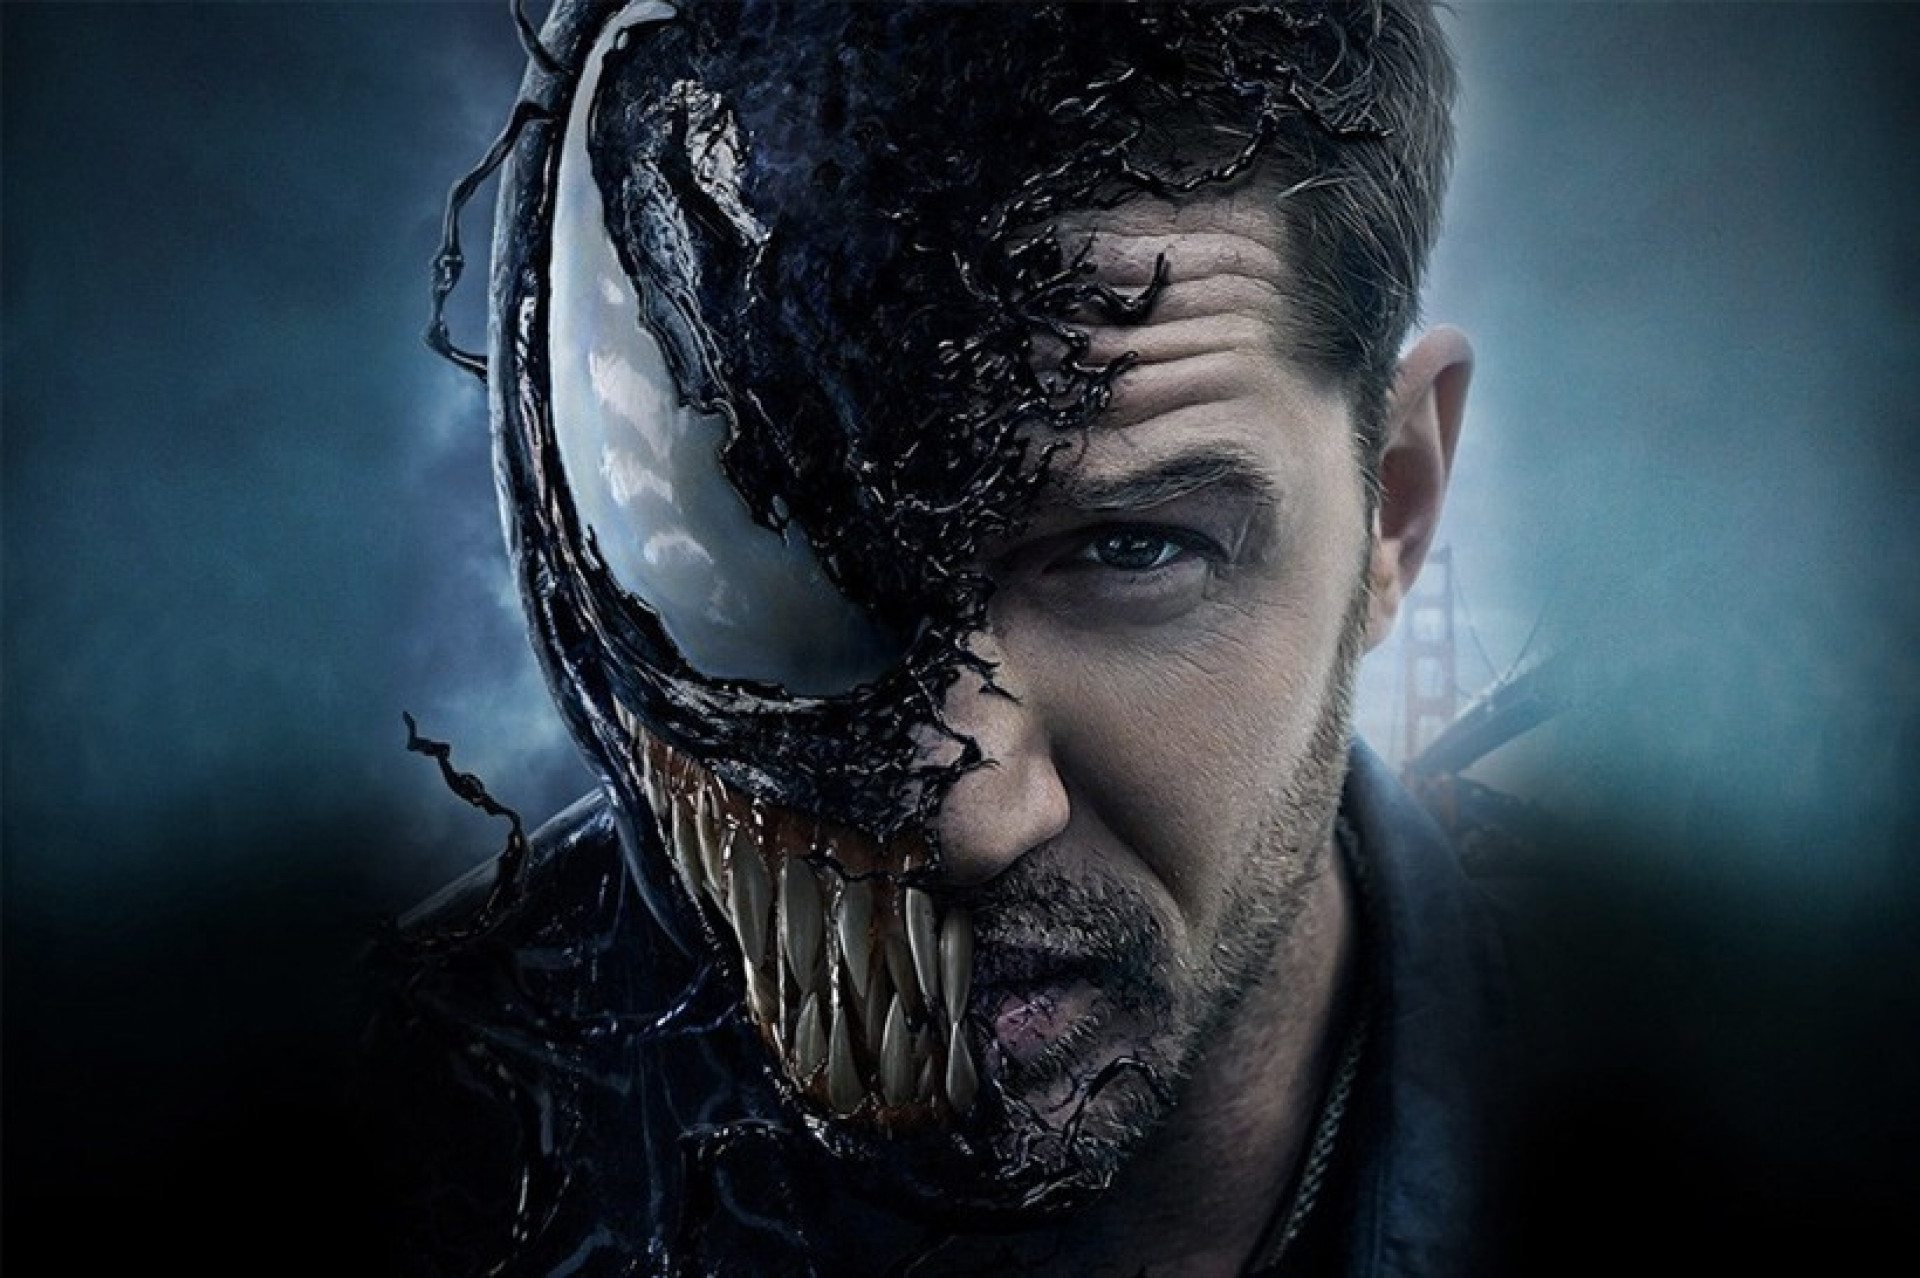 https___hk.hypebeast.com_files_2020_04_venom-2-title-release-date-delayed-let-there-be-carnage-0